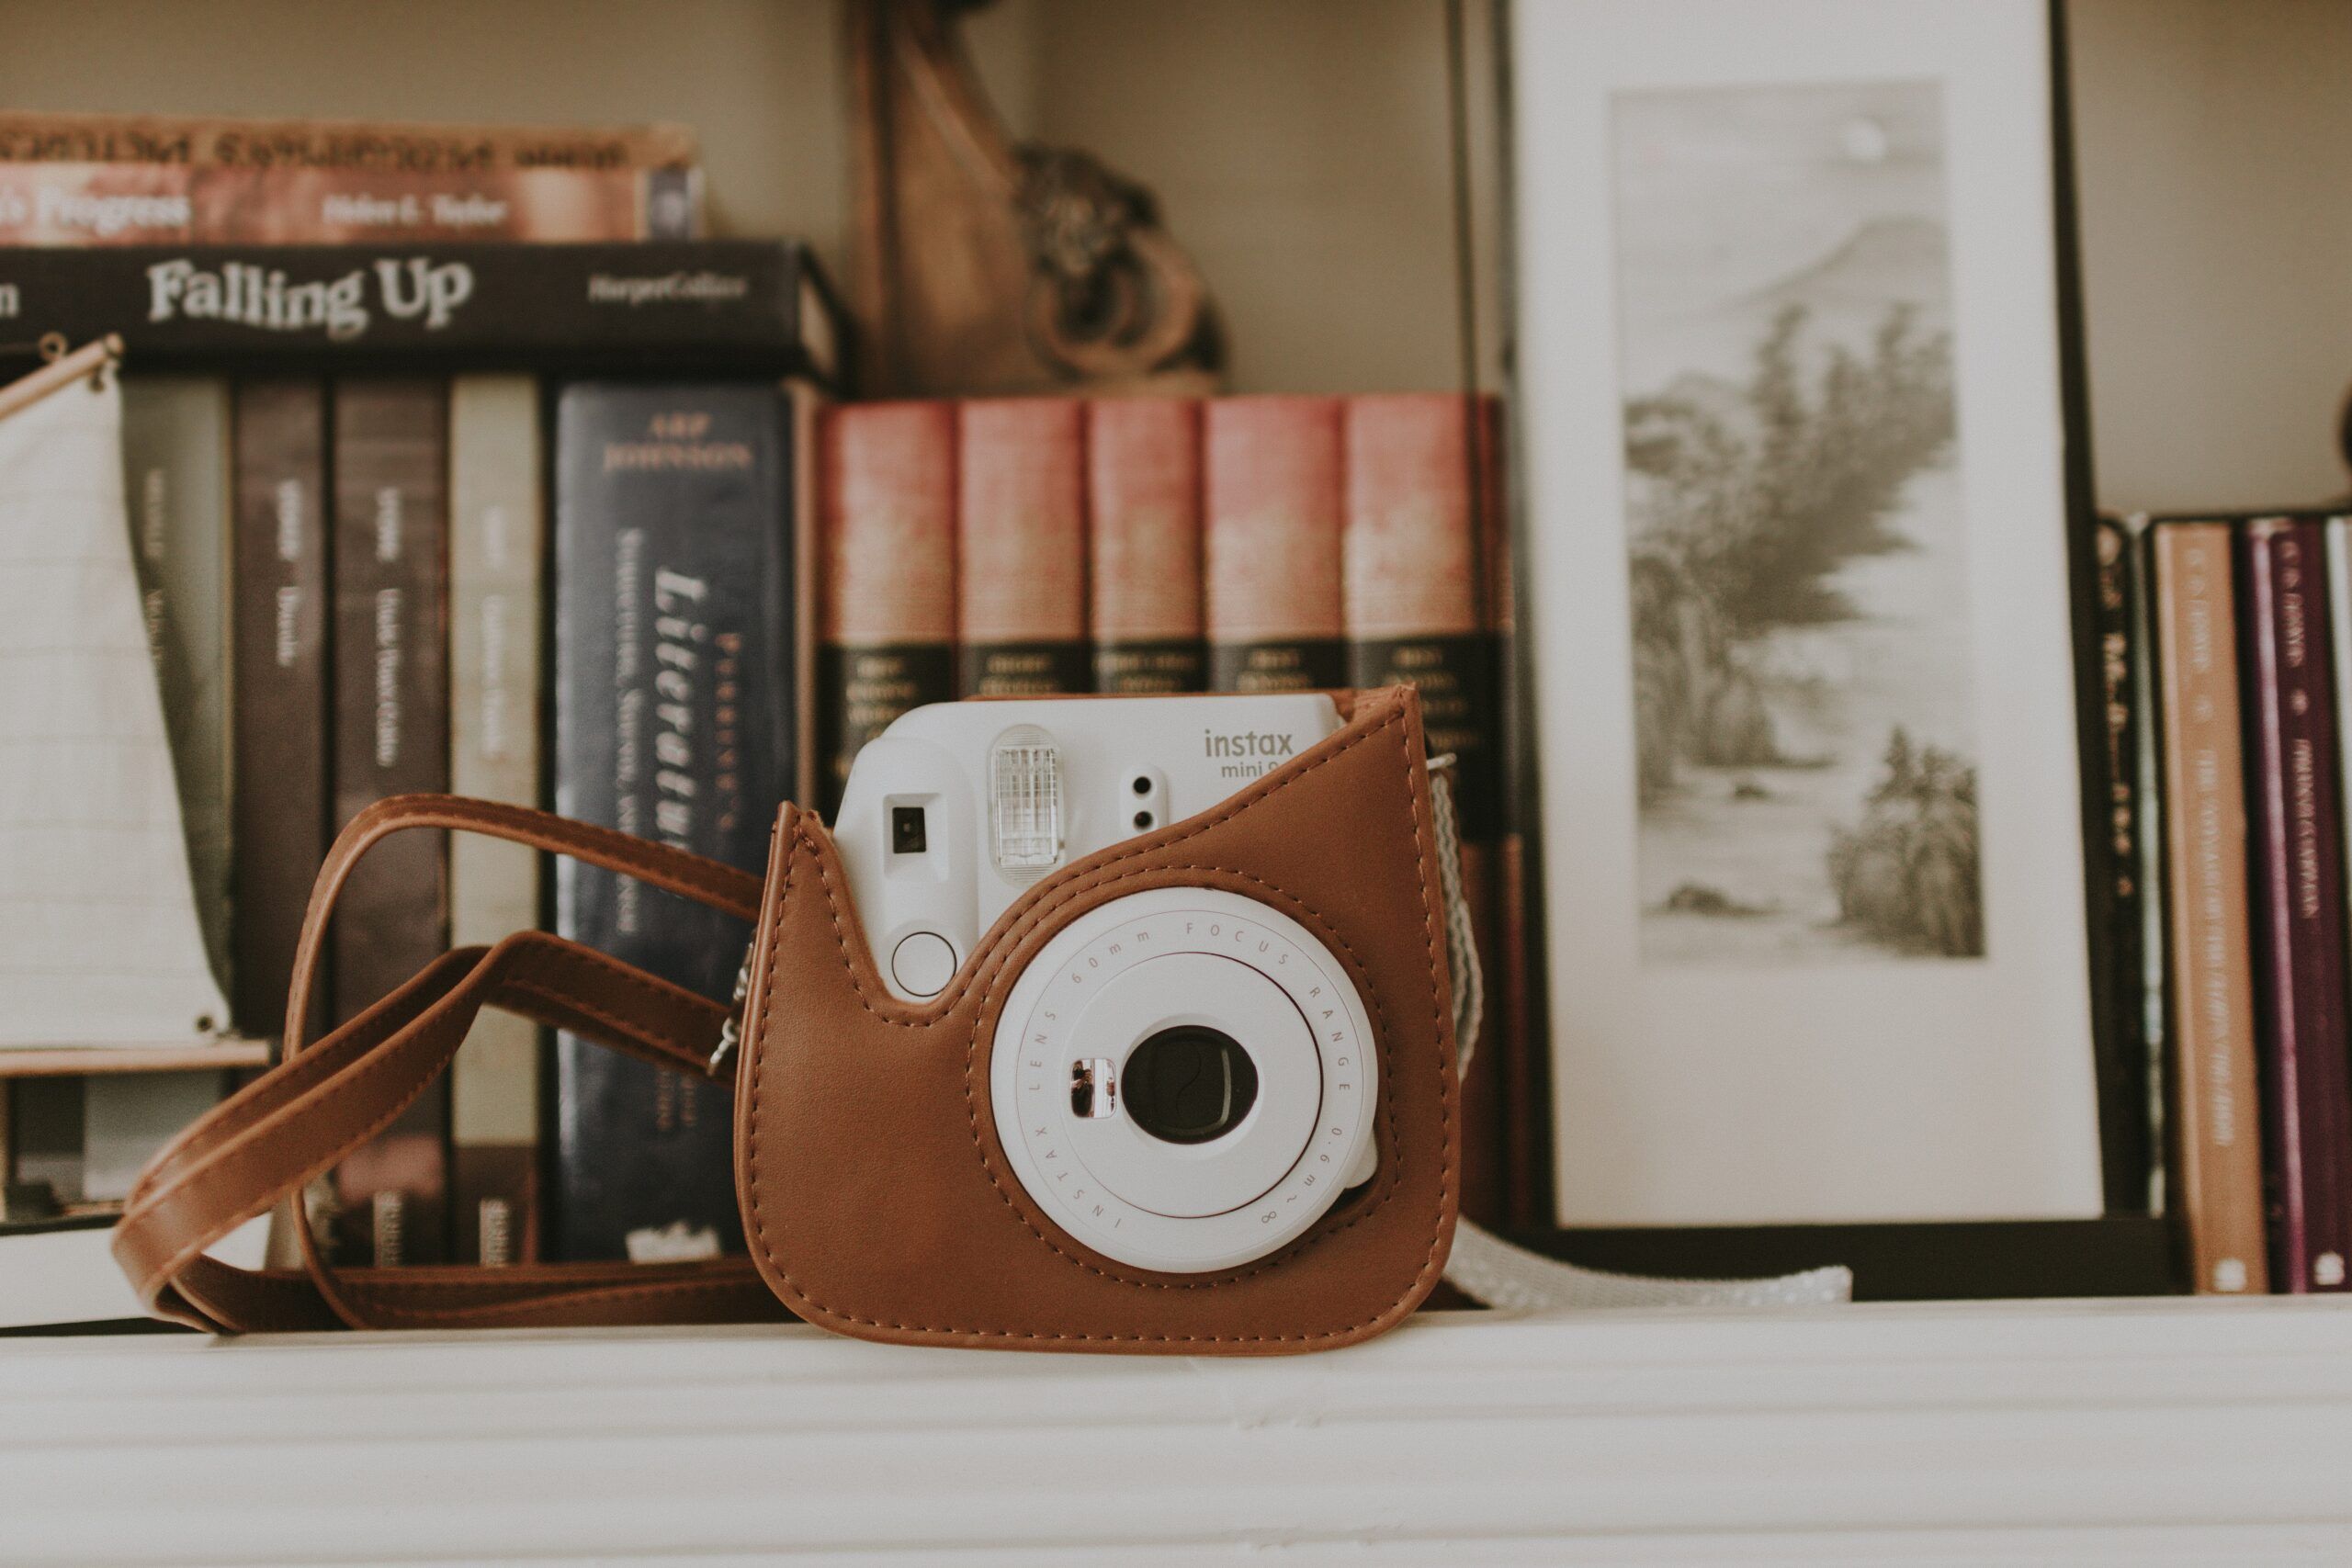 how to sell books on etsy photos: a polaroid-style camera with books lined up in the background